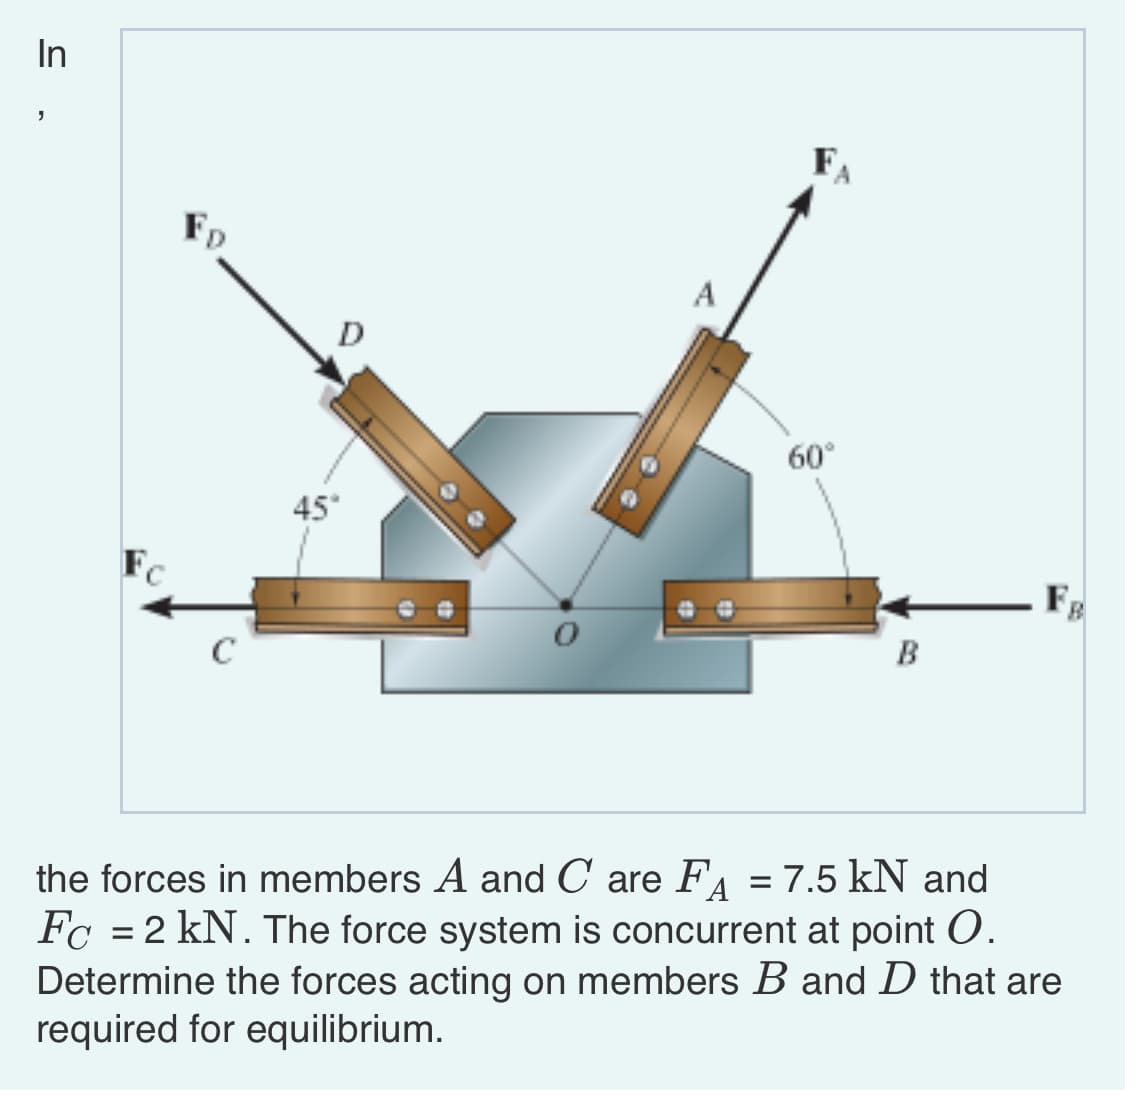 In
5
"
Fo
с
D
45°
A
60°
B
FB
= 7.5 kN and
the forces in members A and C are FA
Fc = 2 kN. The force system is concurrent at point O.
Determine the forces acting on members B and D that are
required for equilibrium.